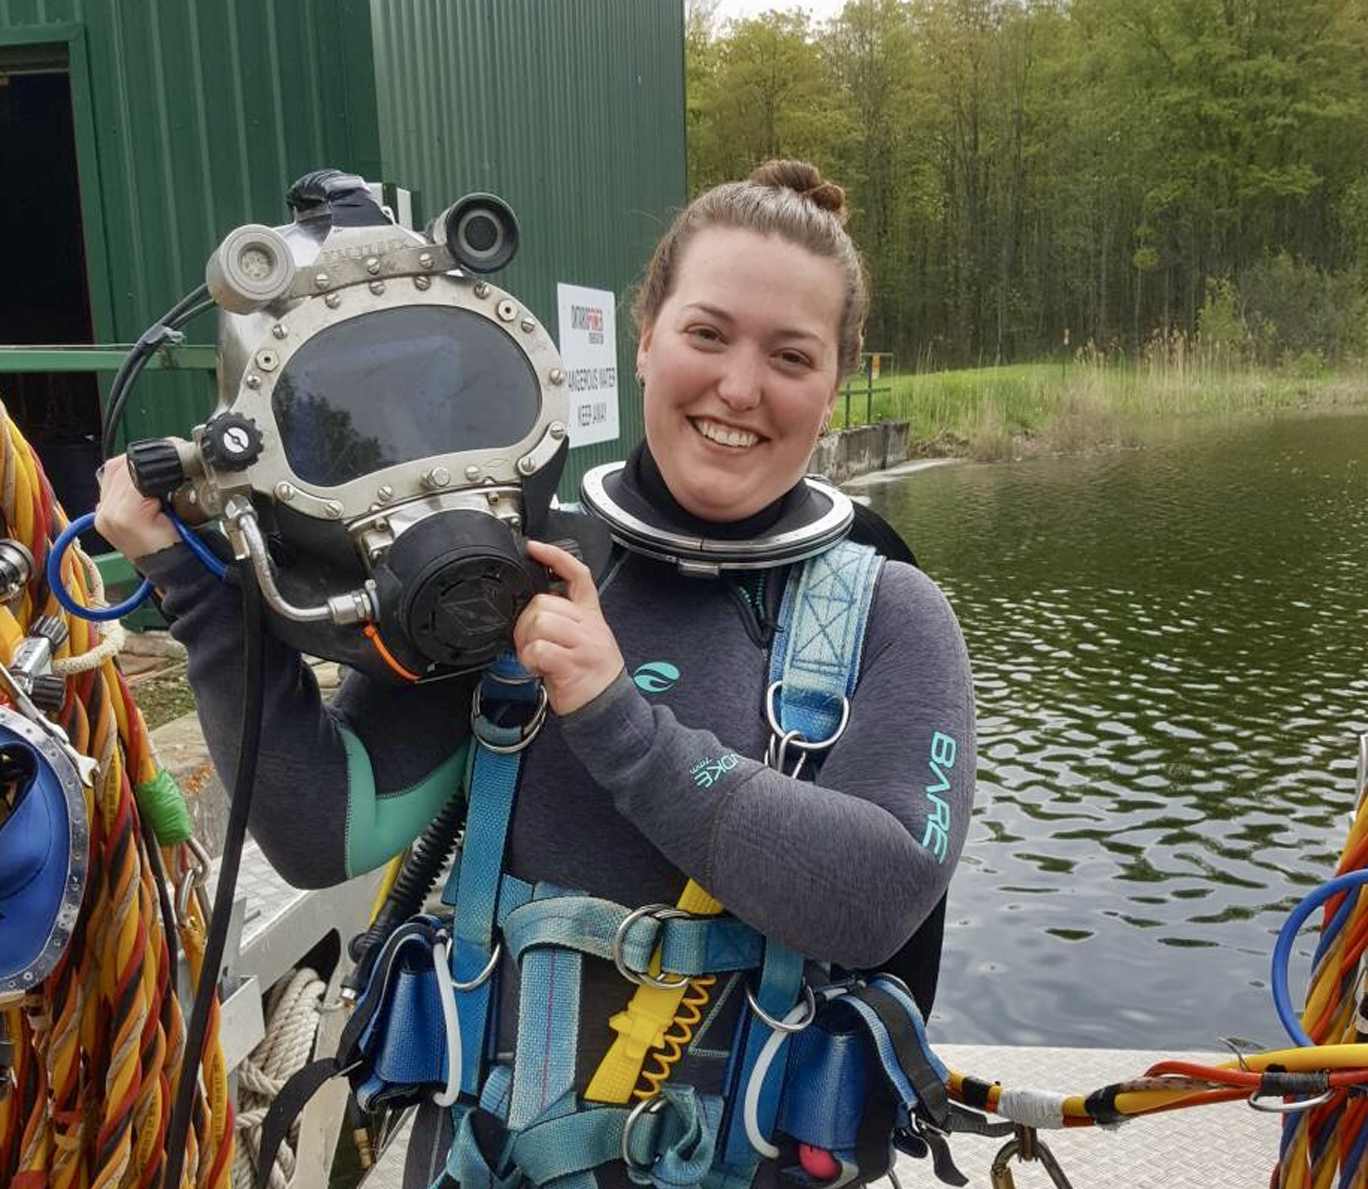 OPG diver Jaimie Dack outfitted in full diving gear.